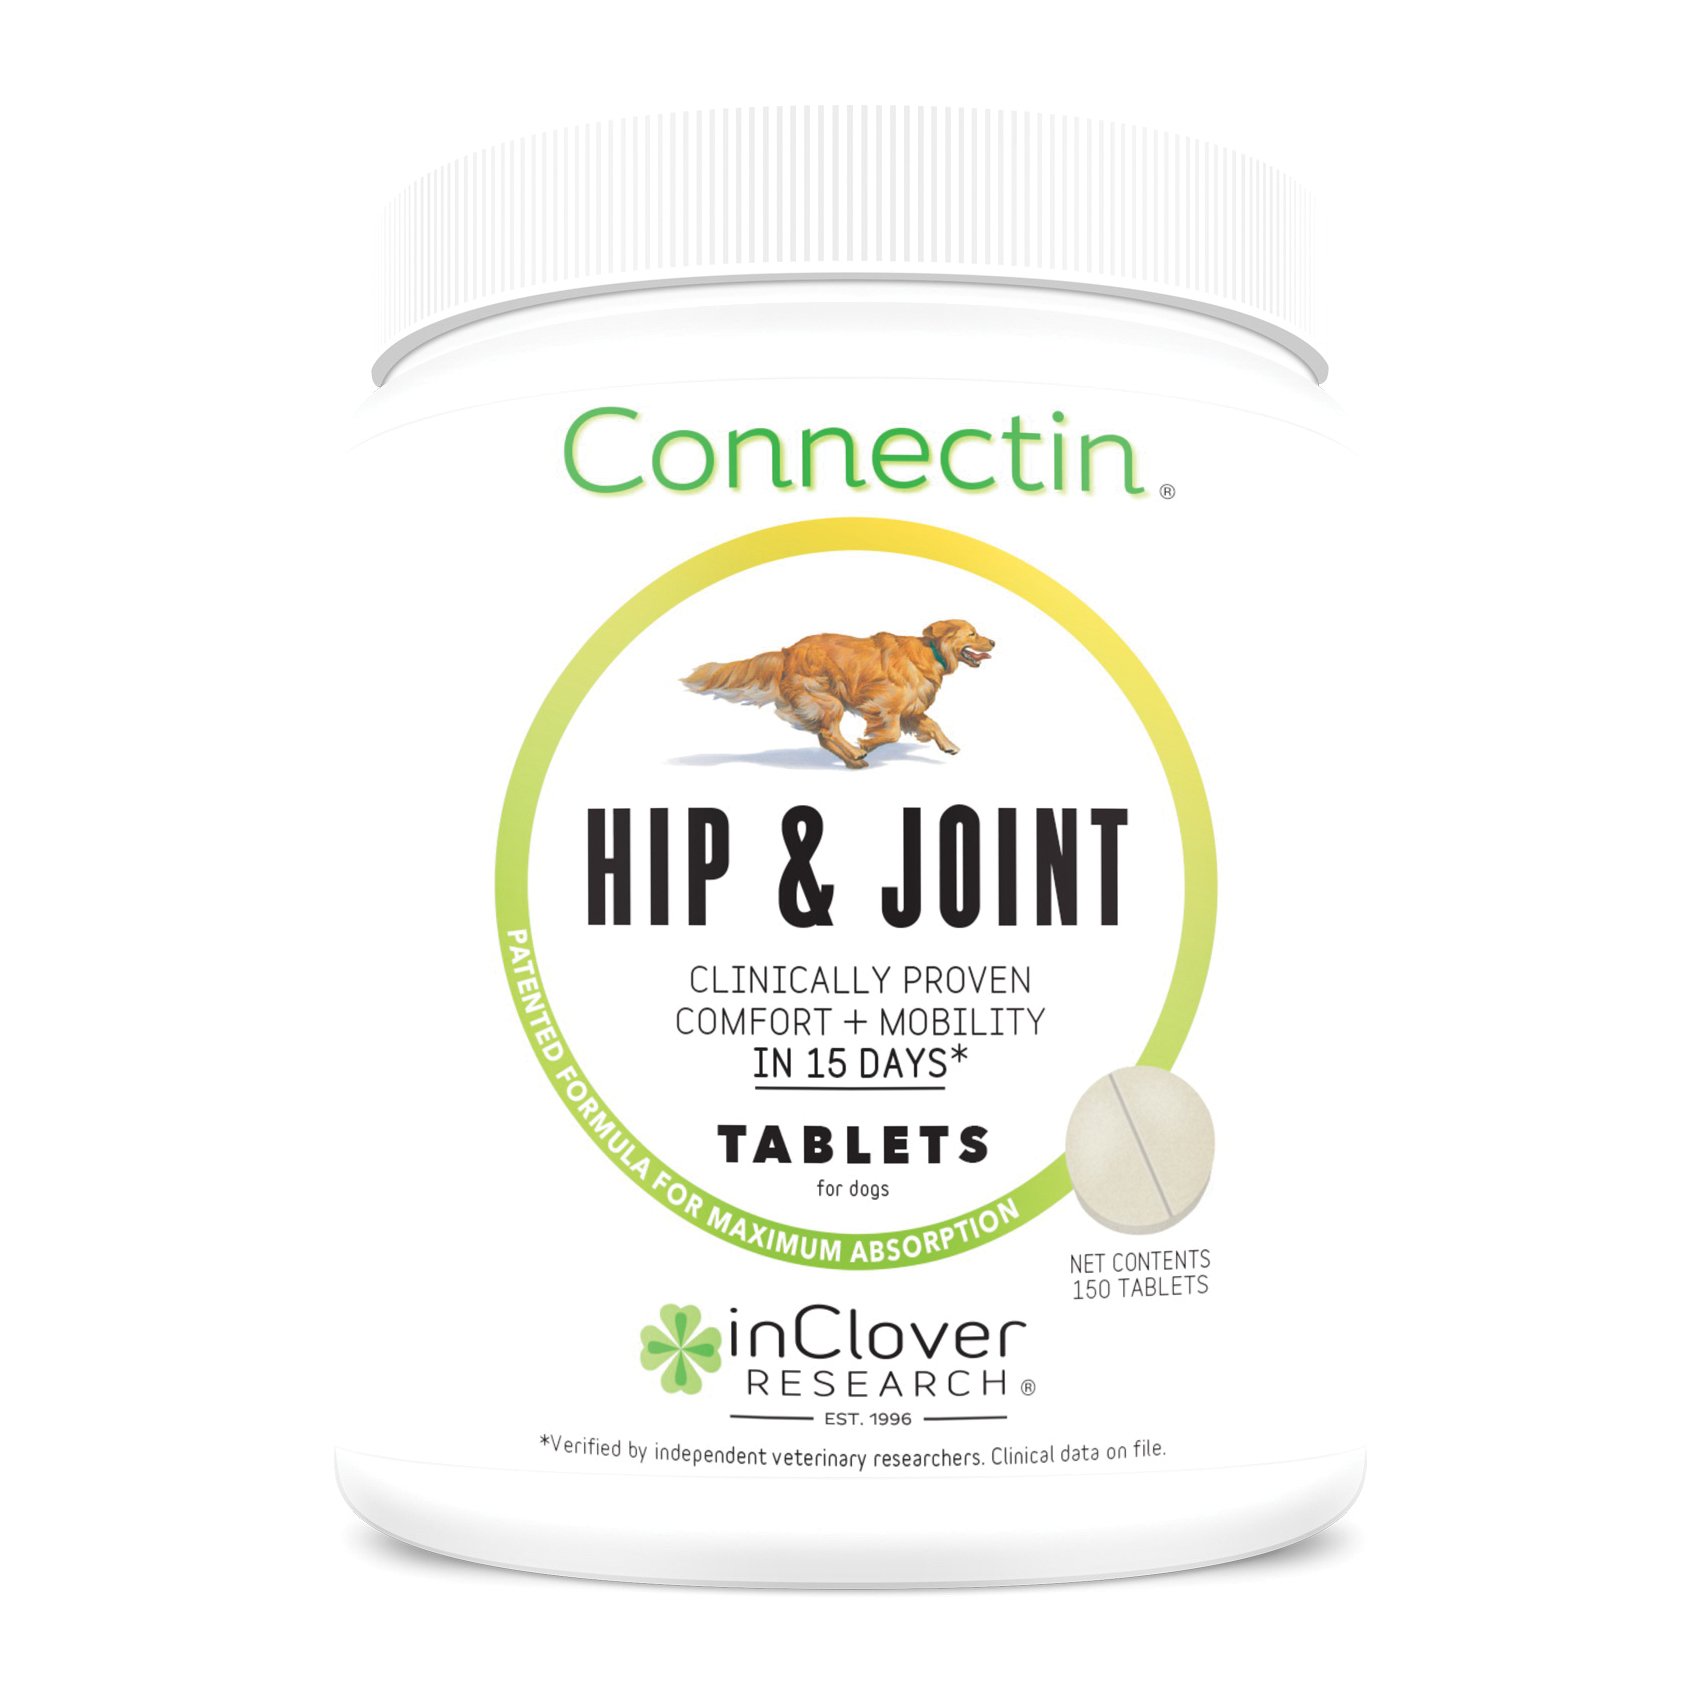 inClover RESEARCH T150 Canine Connectin' Crunchy Tablet, Pork Flavor Bottle - 1